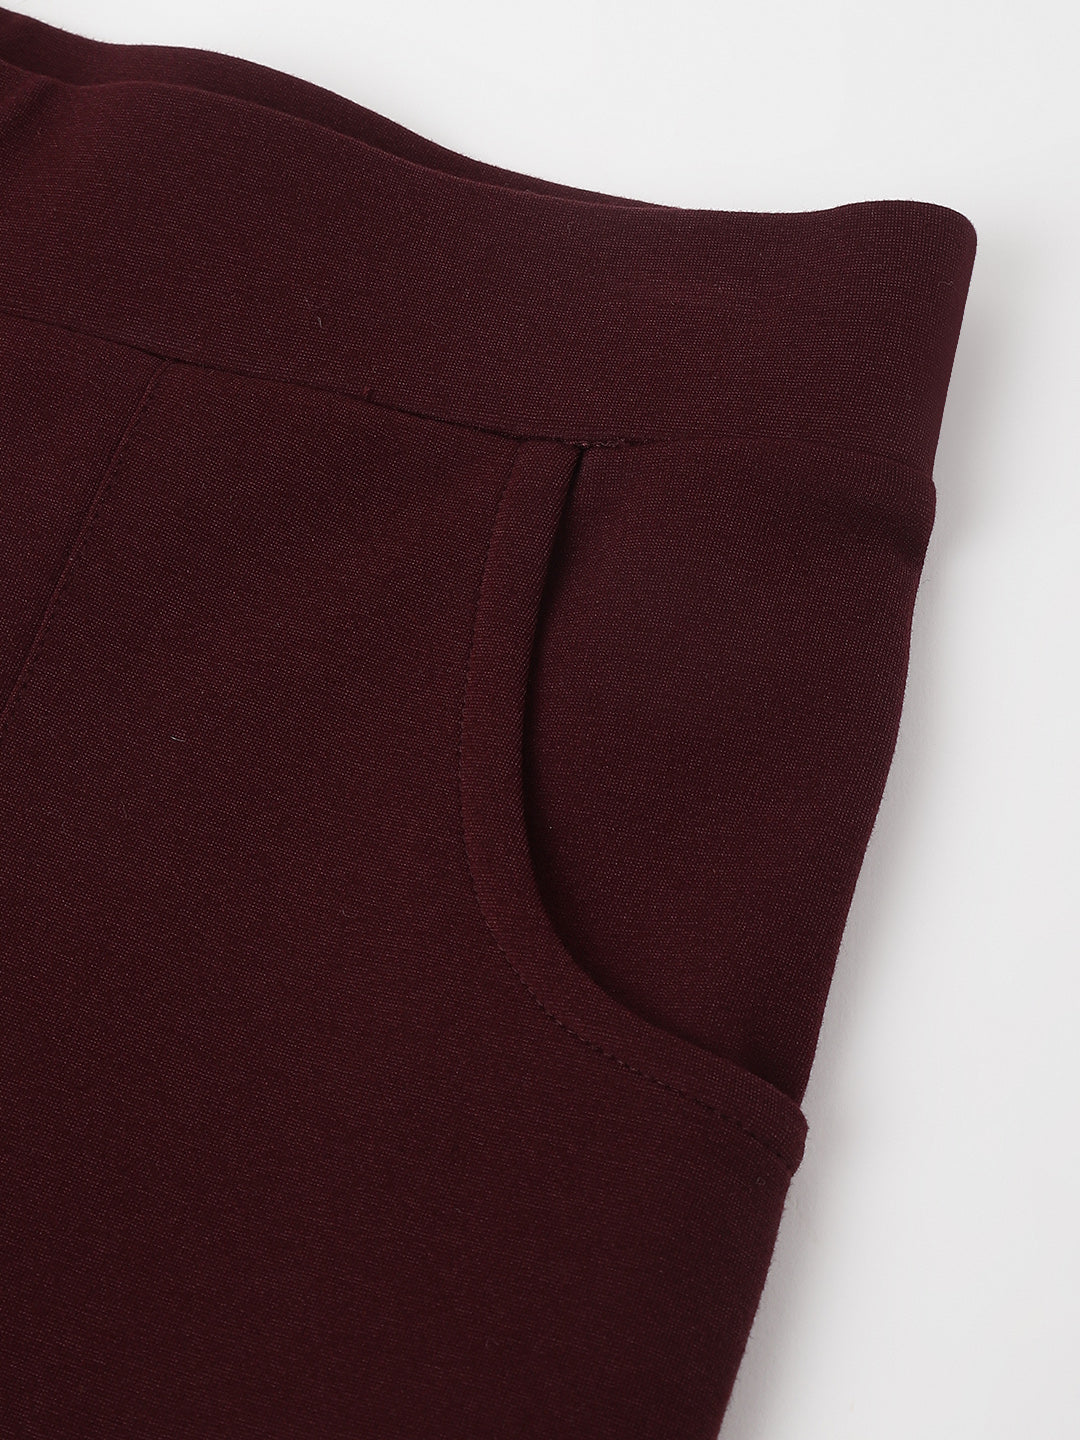 Wine Solid Jeggings Pant